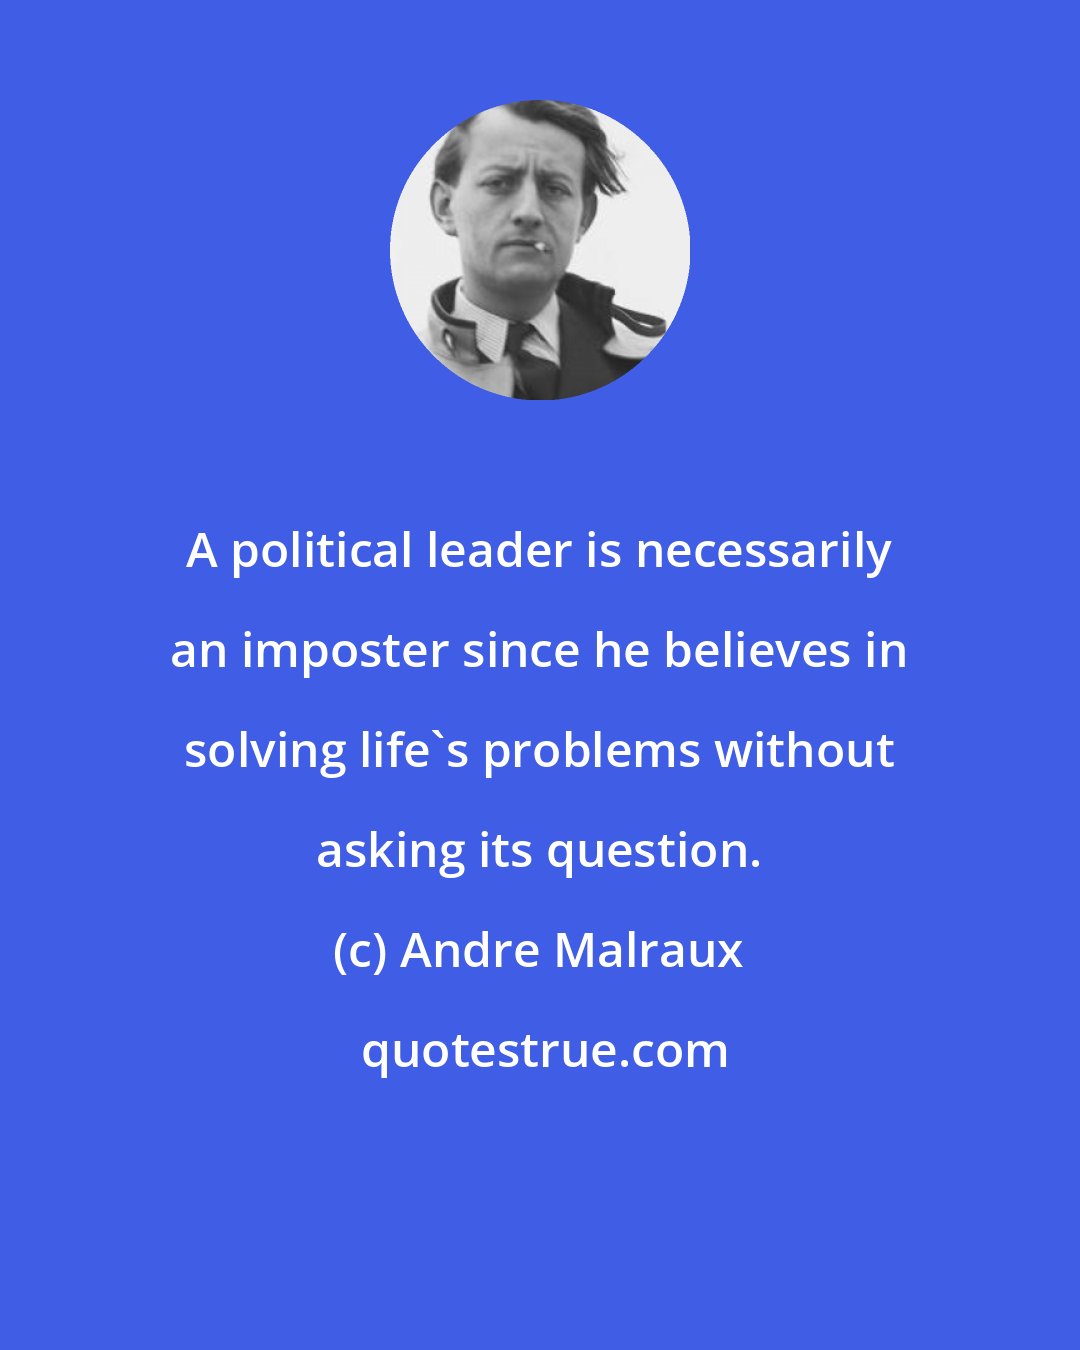 Andre Malraux: A political leader is necessarily an imposter since he believes in solving life's problems without asking its question.